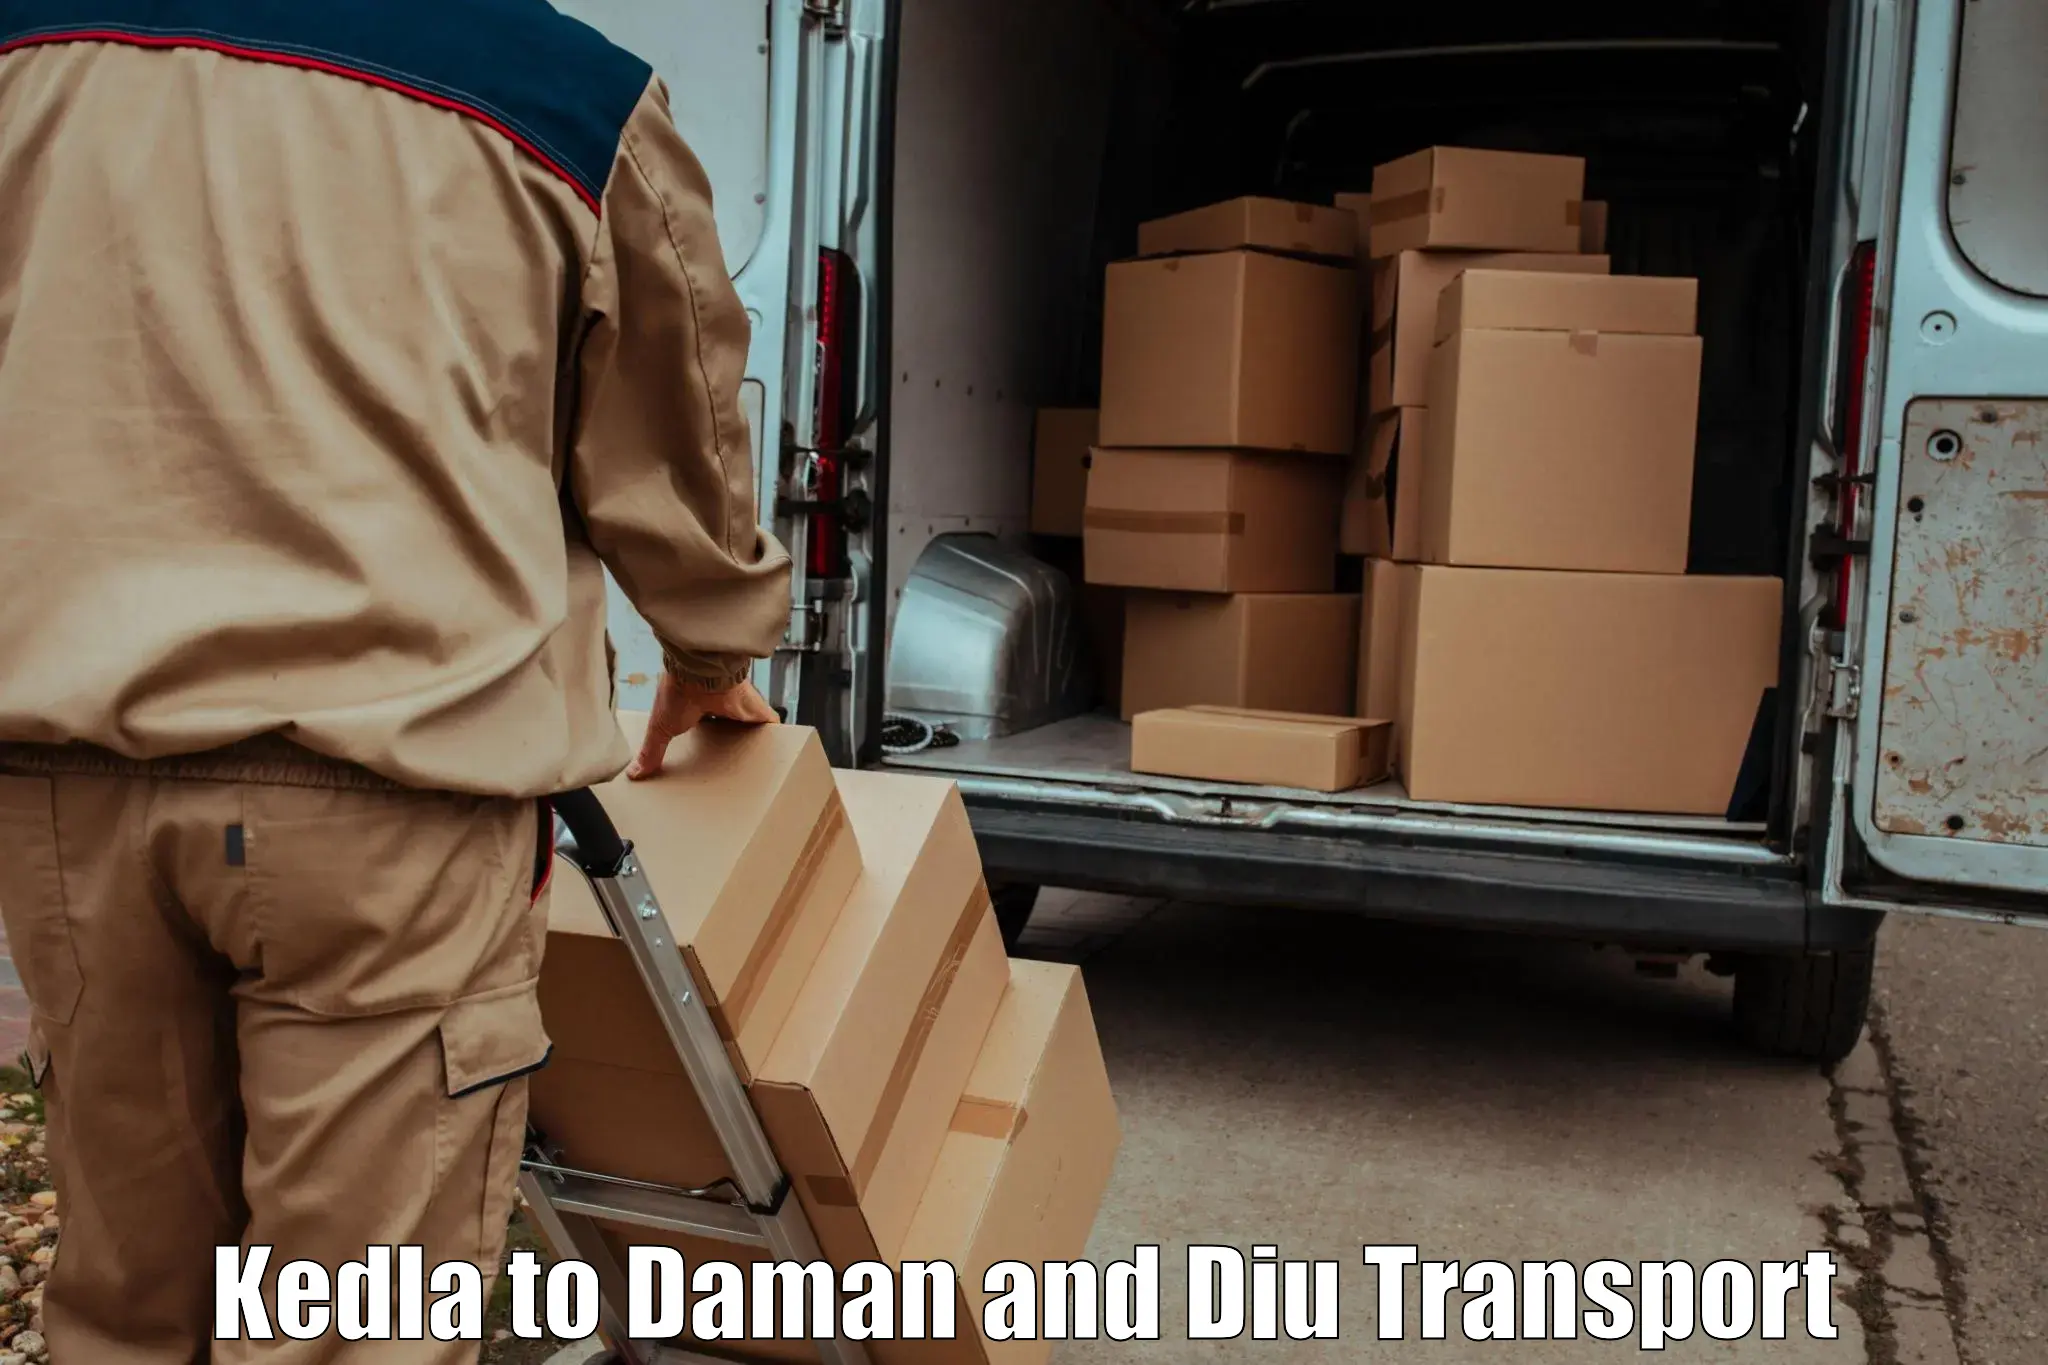 Air freight transport services Kedla to Diu